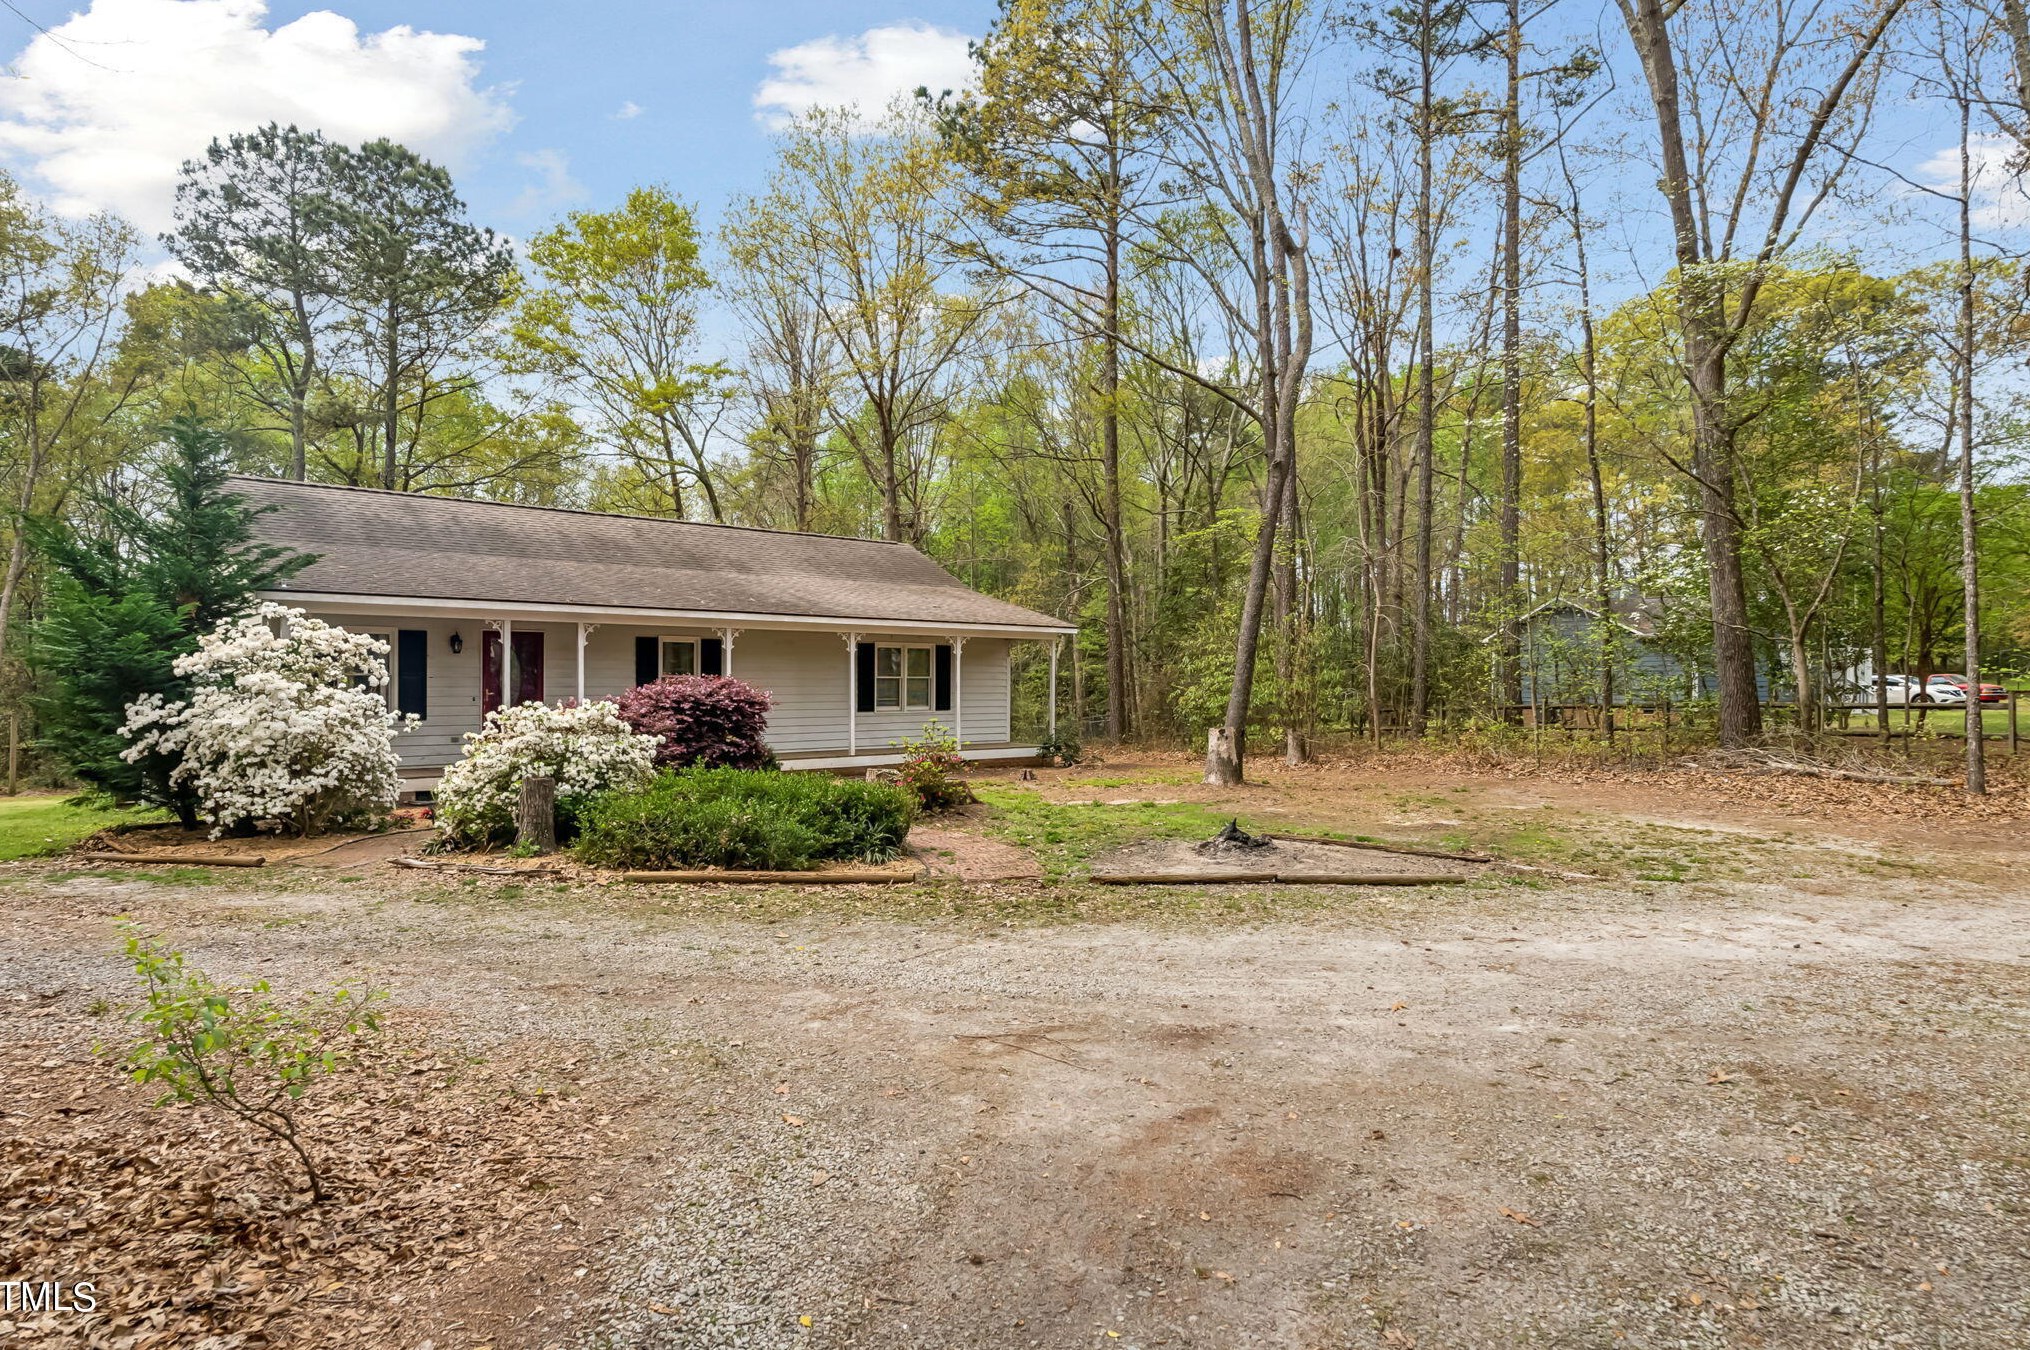 123 Stancil Dr, Angier, NC 27501